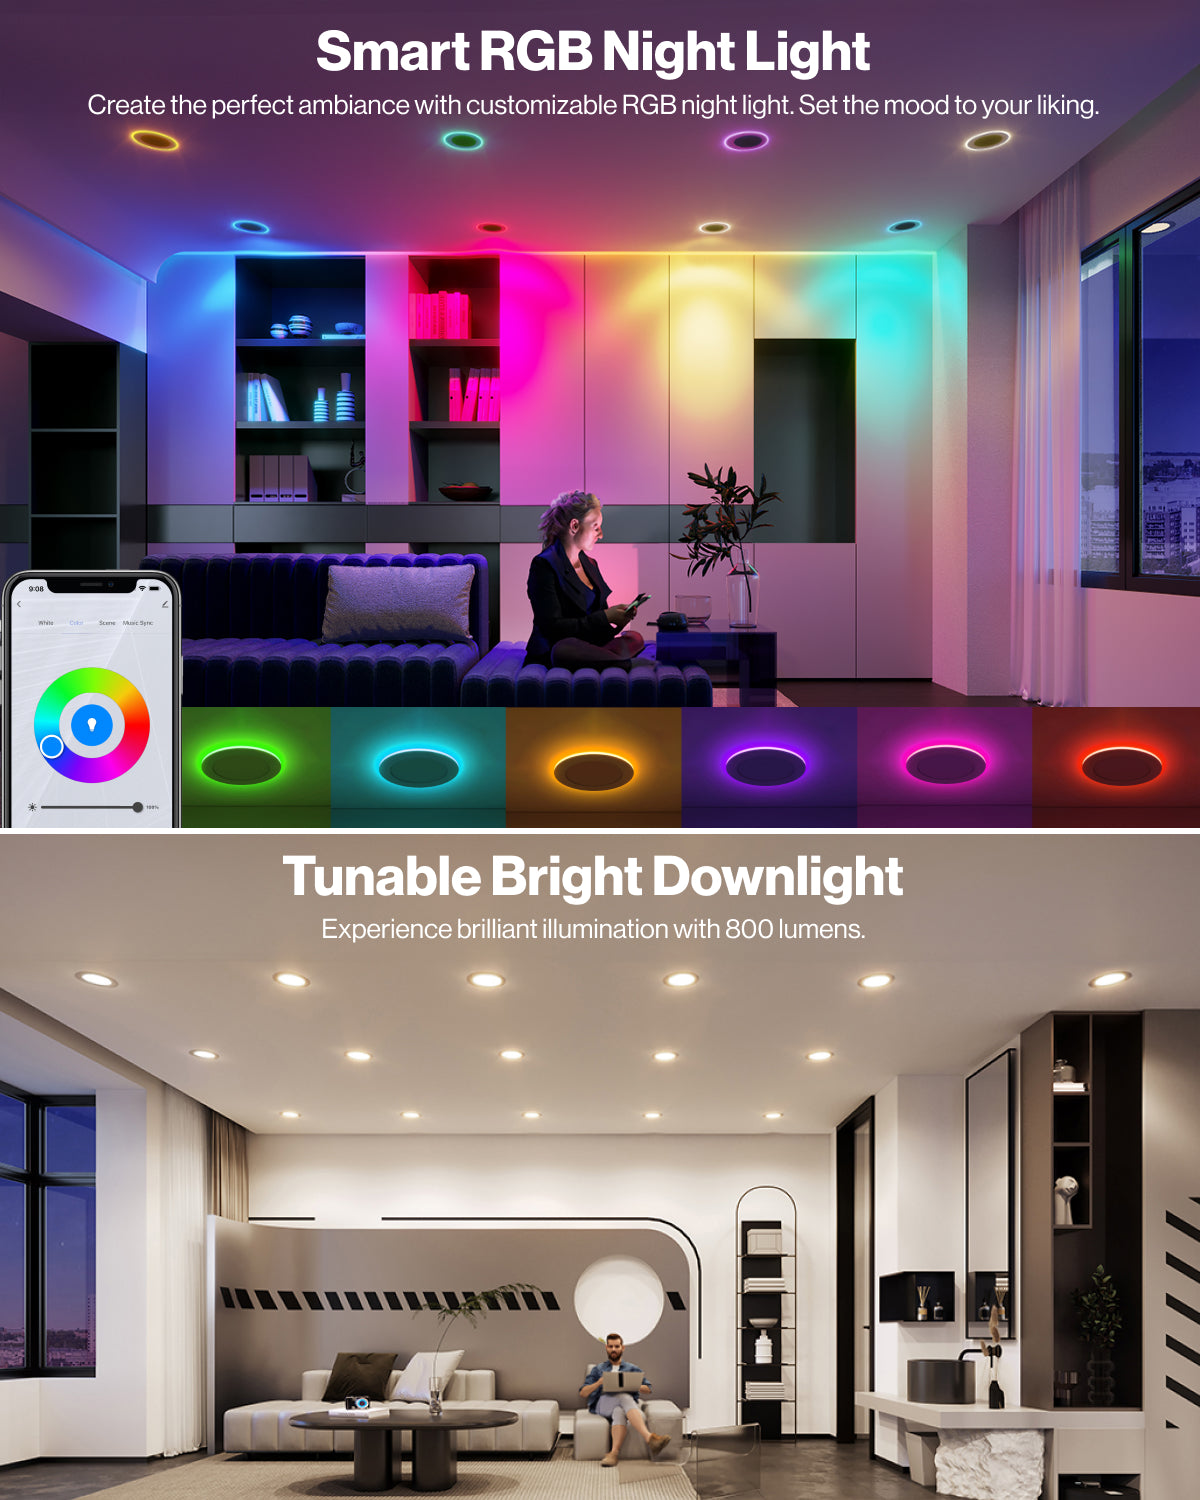 Tune the color temperature of the main light, or switch to the Night Light mode and change colors via the RGB rainbow color wheel on the Sunco app.